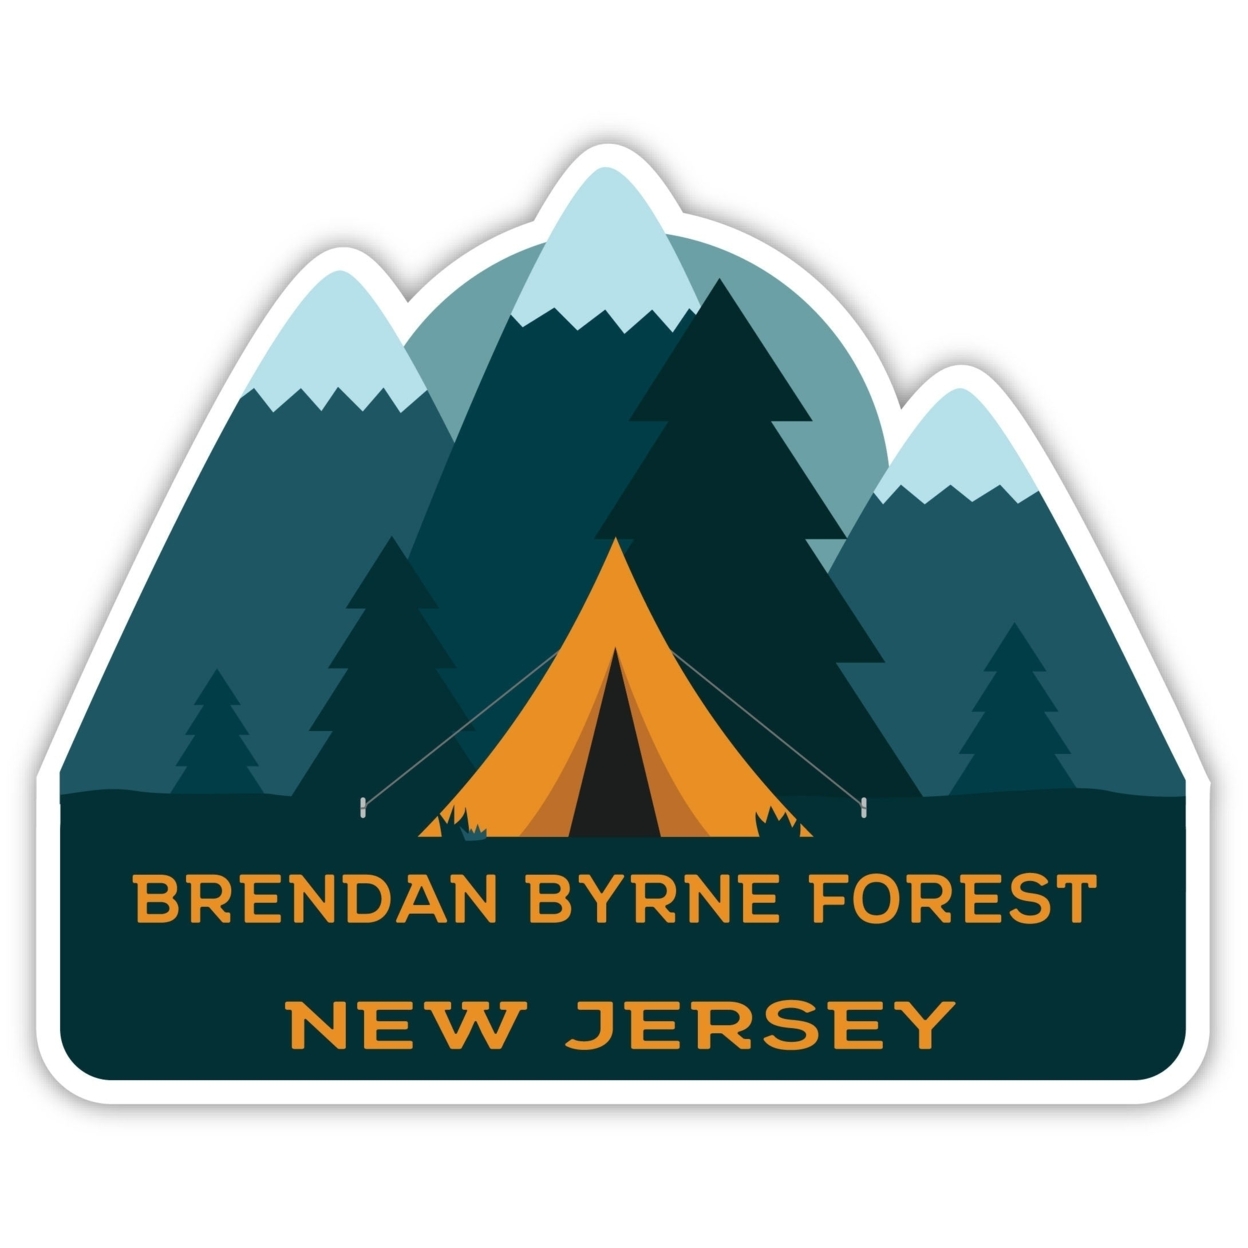 Brendan Byrne Forest New Jersey Souvenir Decorative Stickers (Choose Theme And Size) - Single Unit, 12-Inch, Tent